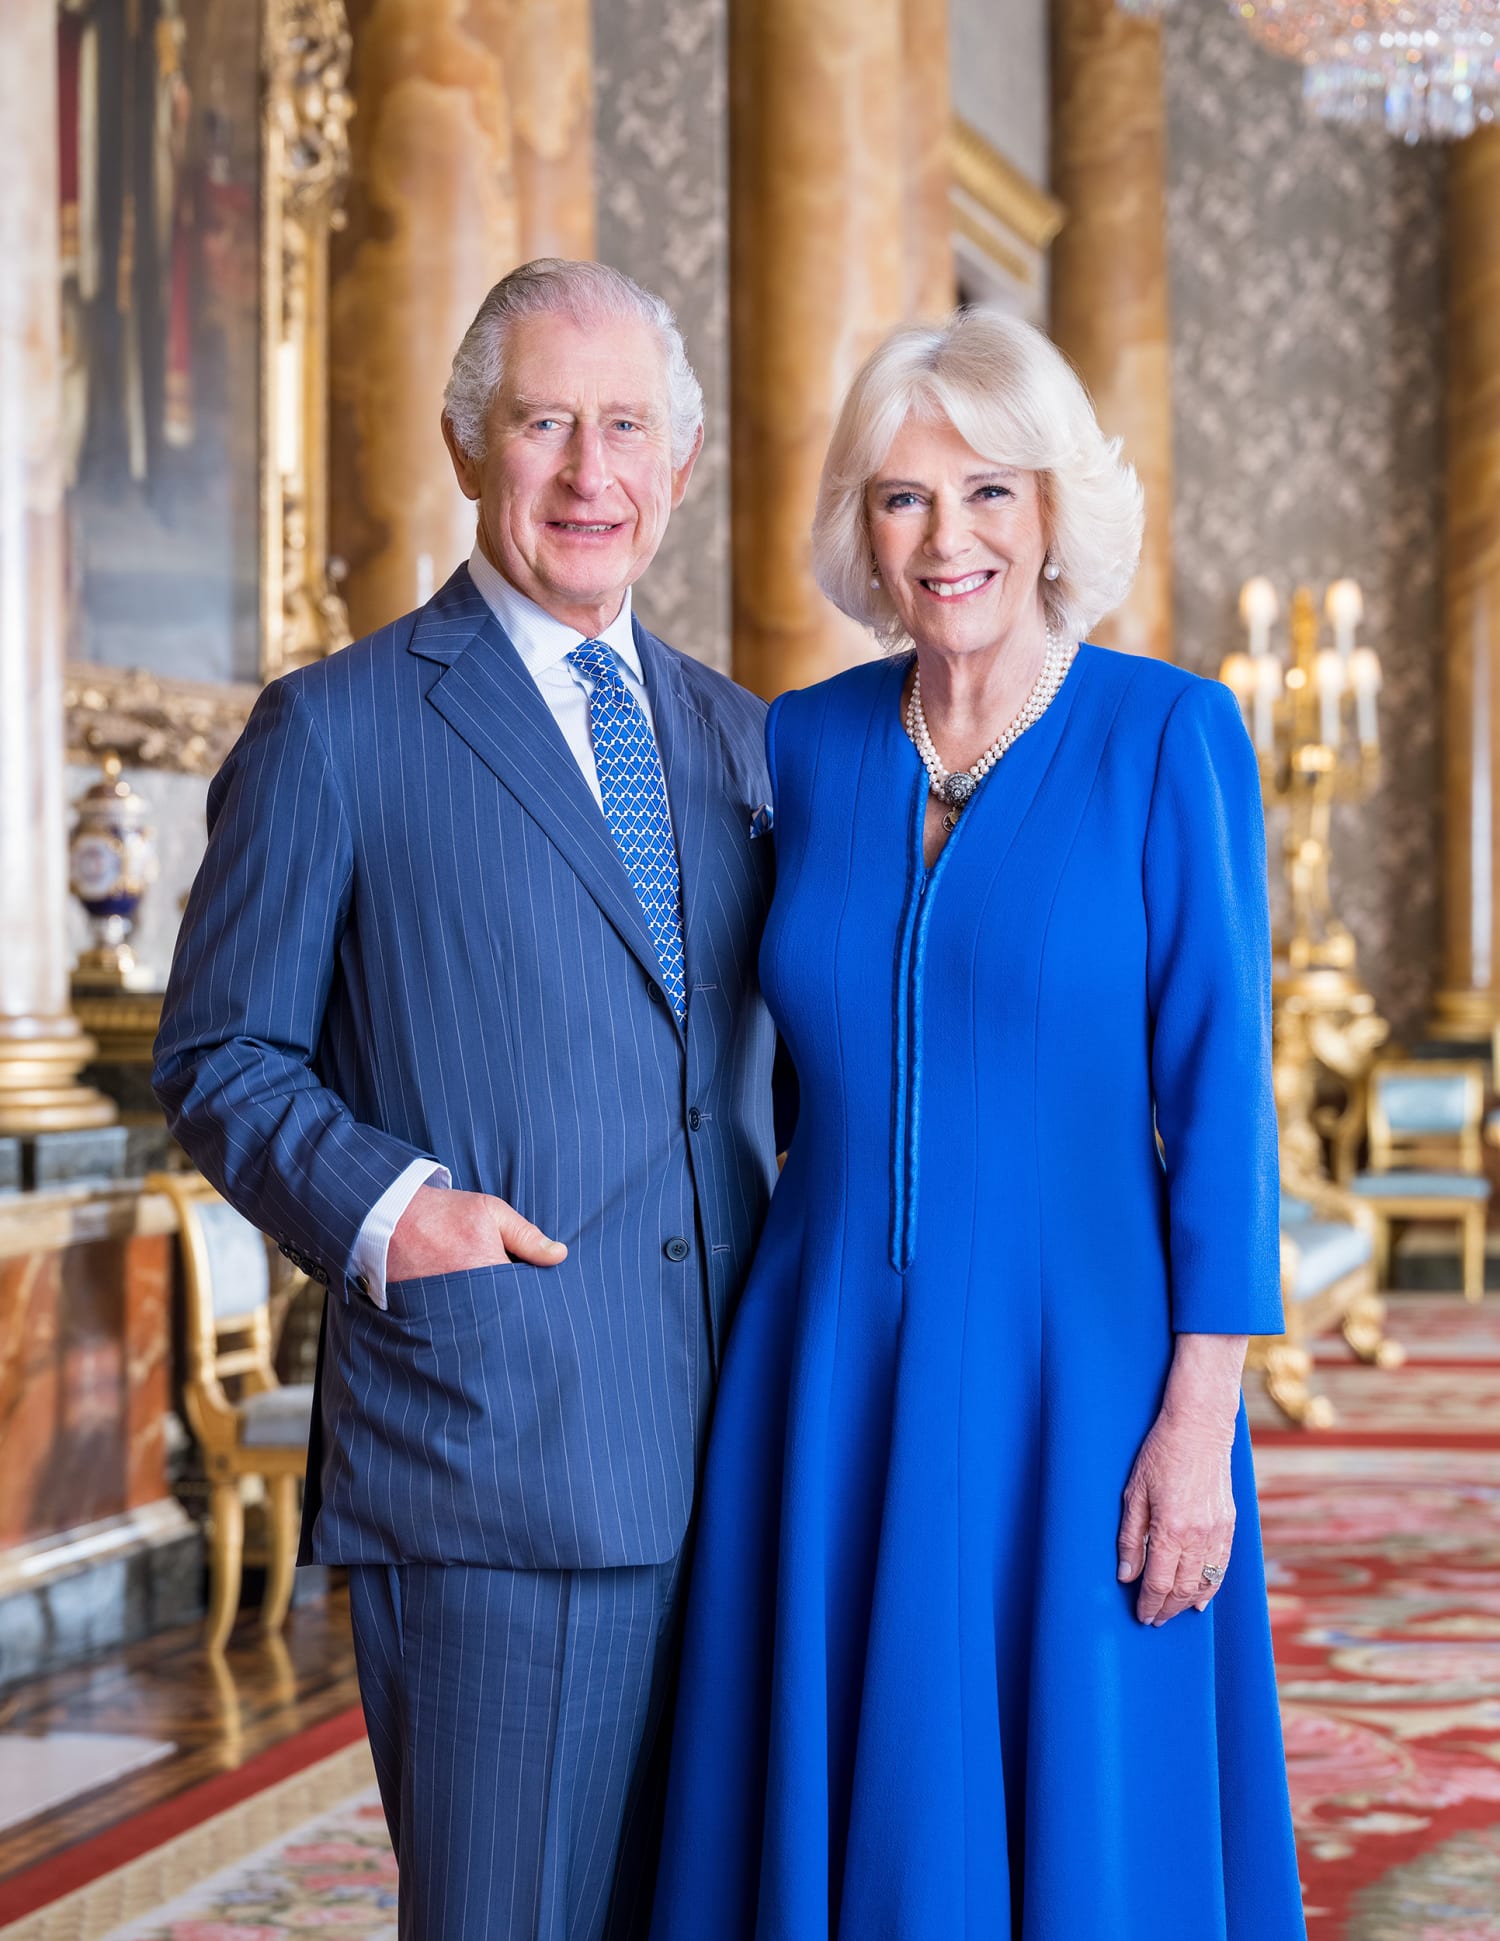 New Portraits of King Charles, The Queen Consort Revealed